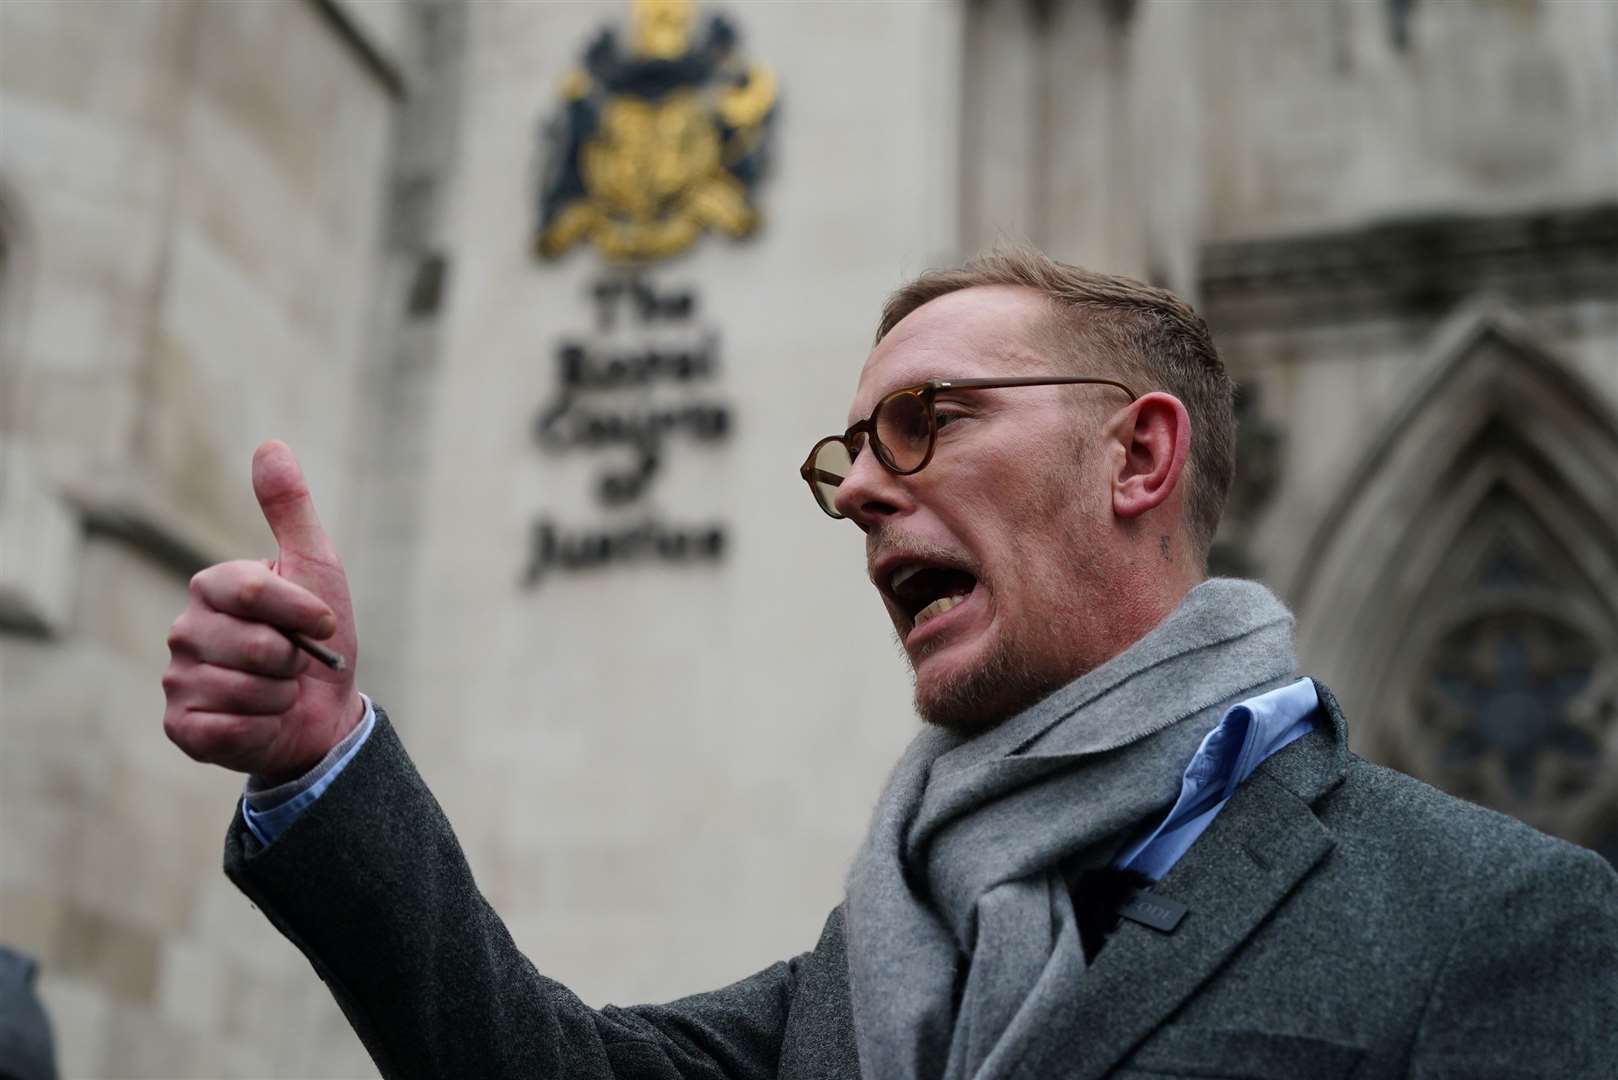 Laurence Fox, pictured in January following the initial ruling, did not attend court for the hearing in March (Jordan Pettitt/PA)